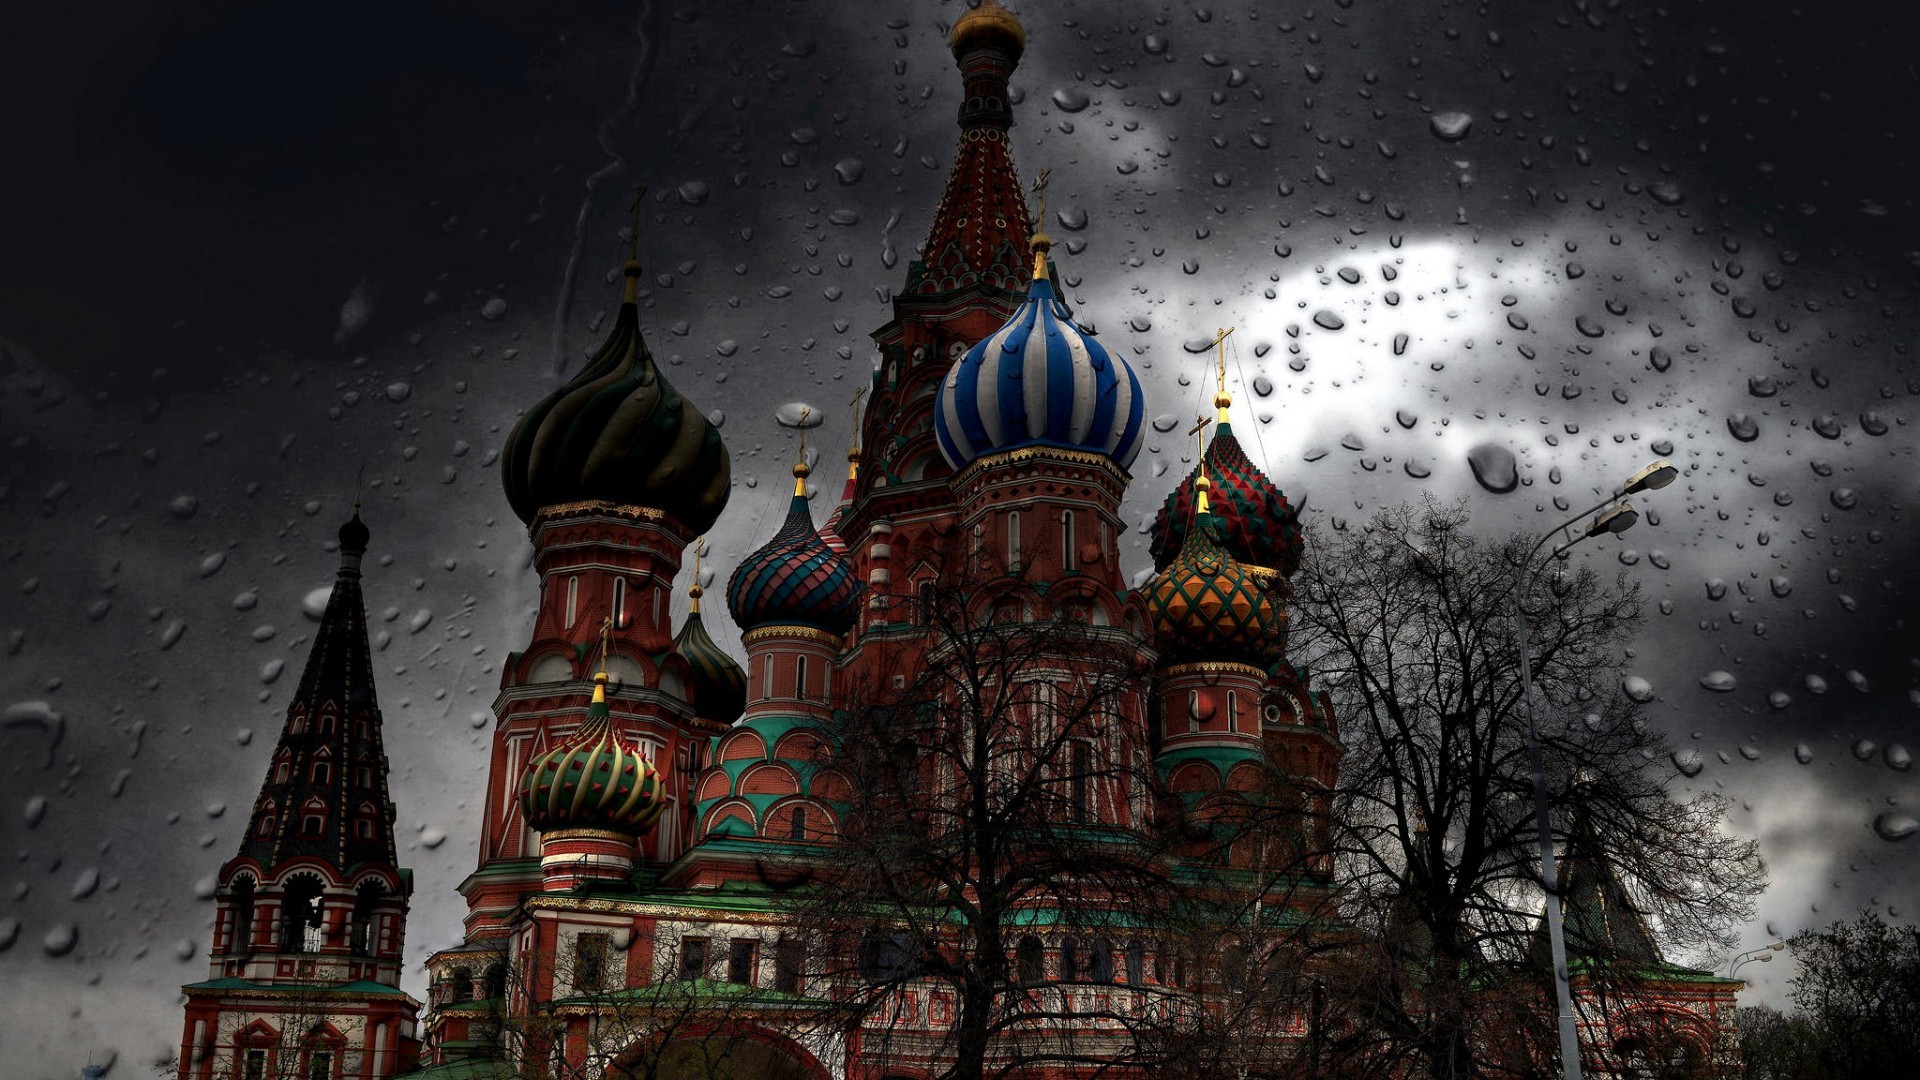 General 1920x1080 Moscow rain water drops church Russia water on glass building landmark Saint Basil's Cathedral